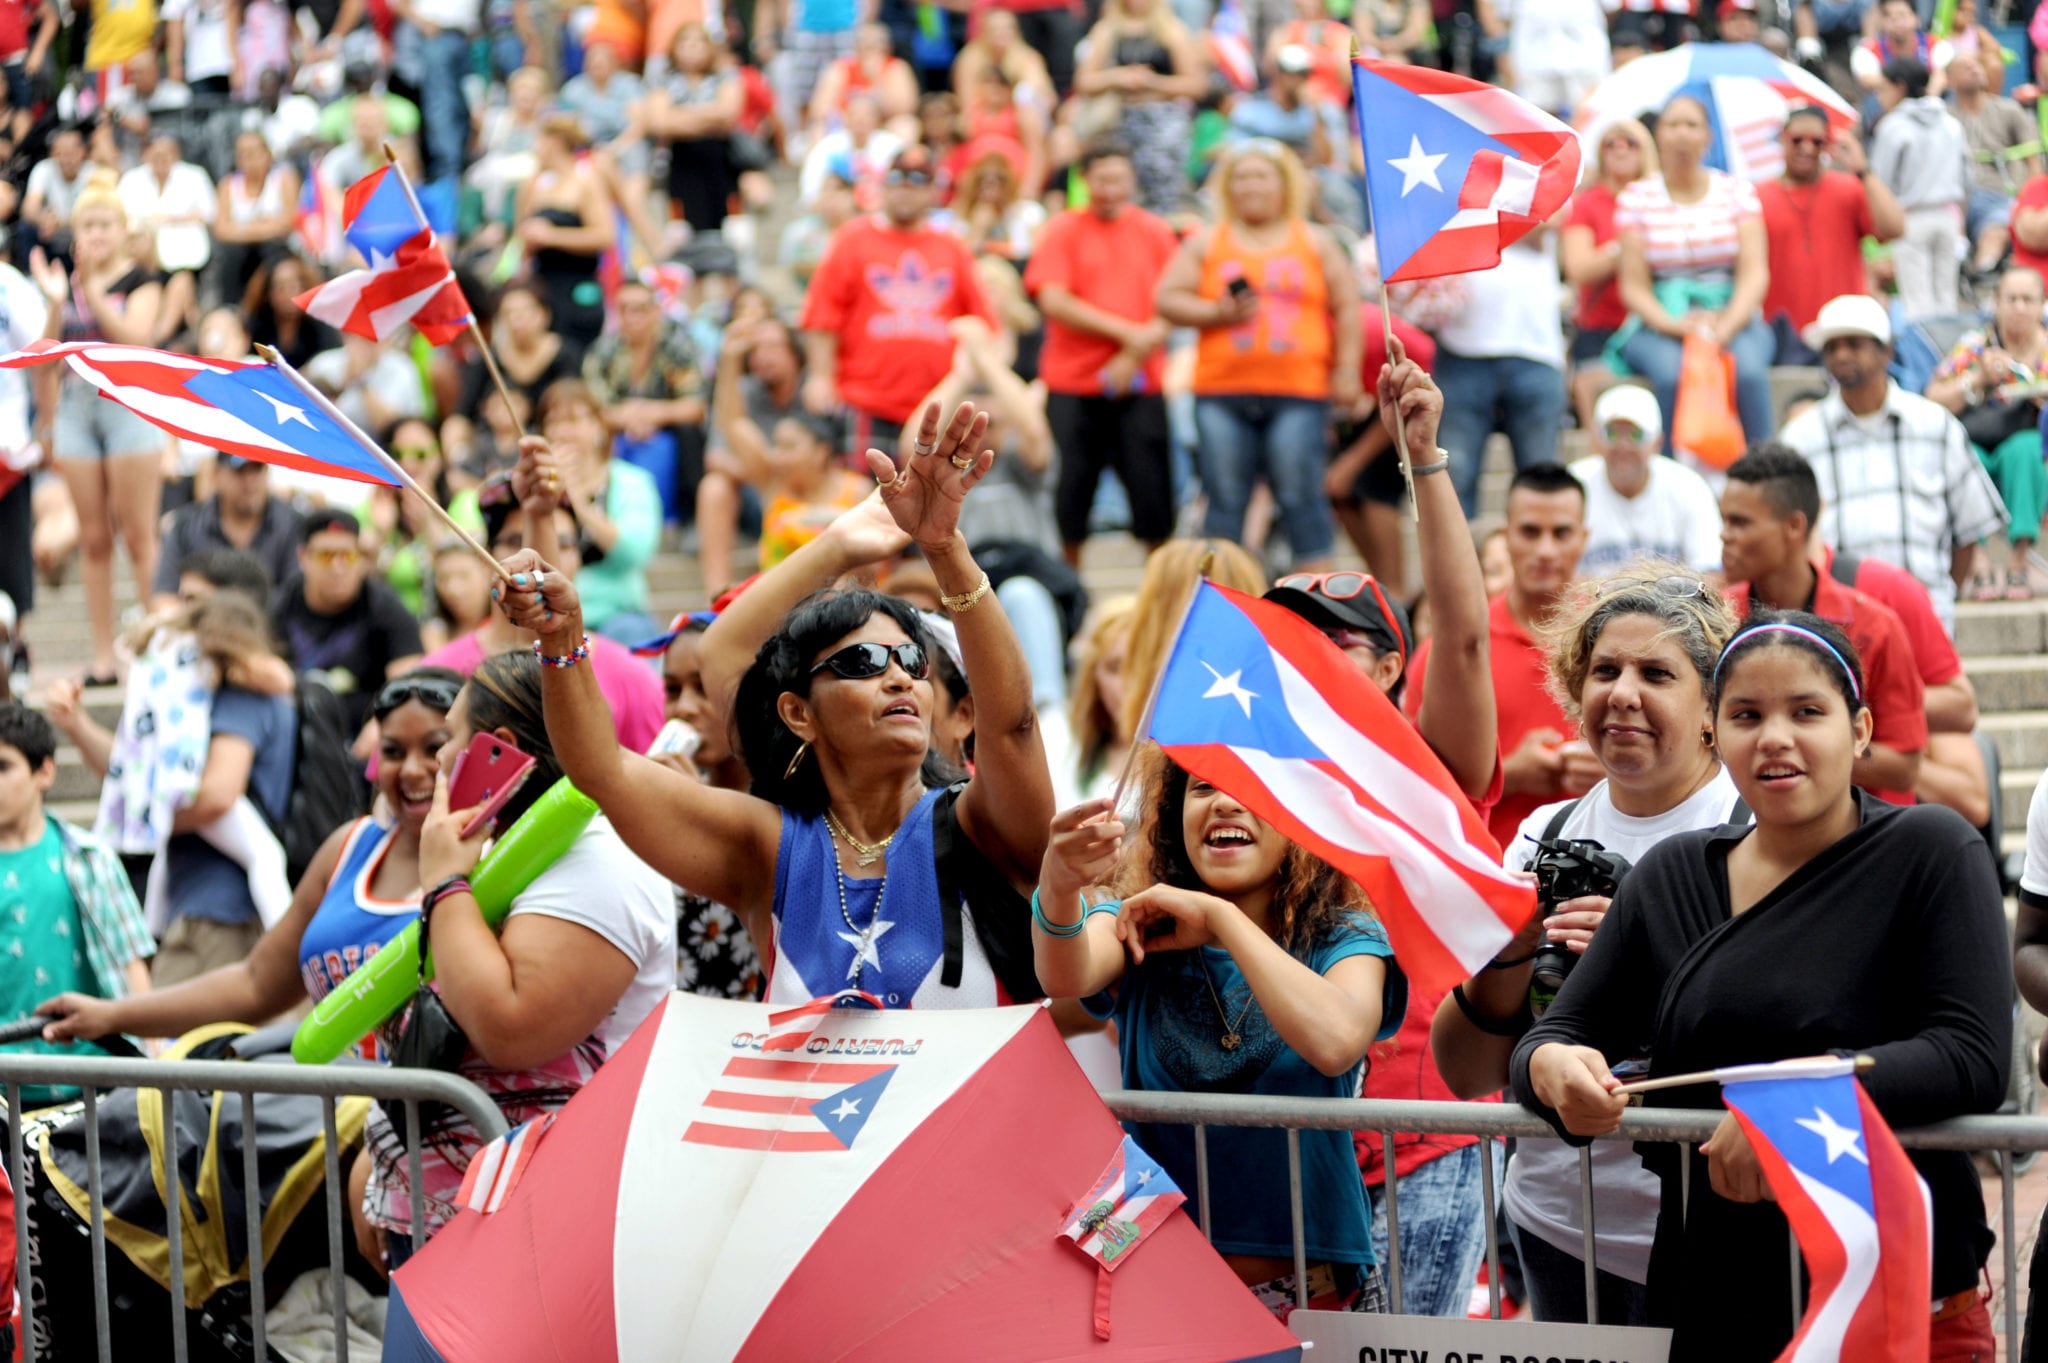 Puerto Rican Festival kicks off in Boston this weekend The Bay State